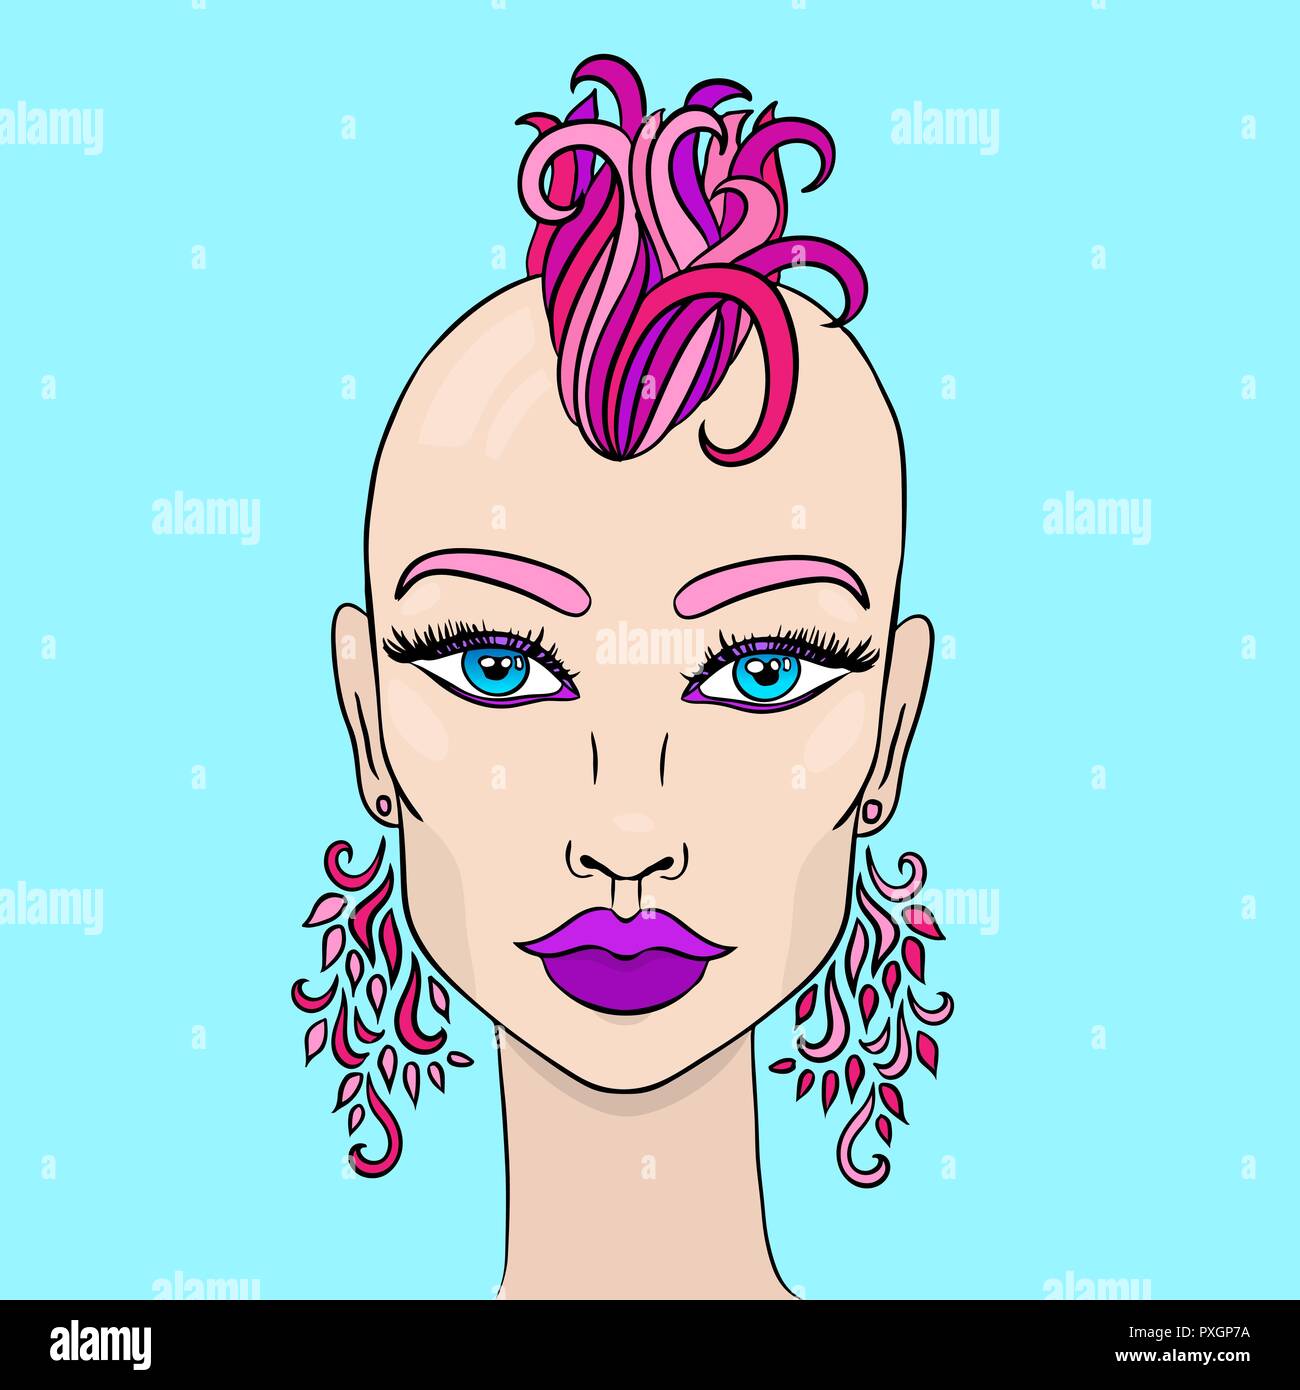 Doodle girl with shaved head and earrings. Womens portrait with rink and violet hair. Vector illustration. Stock Vector